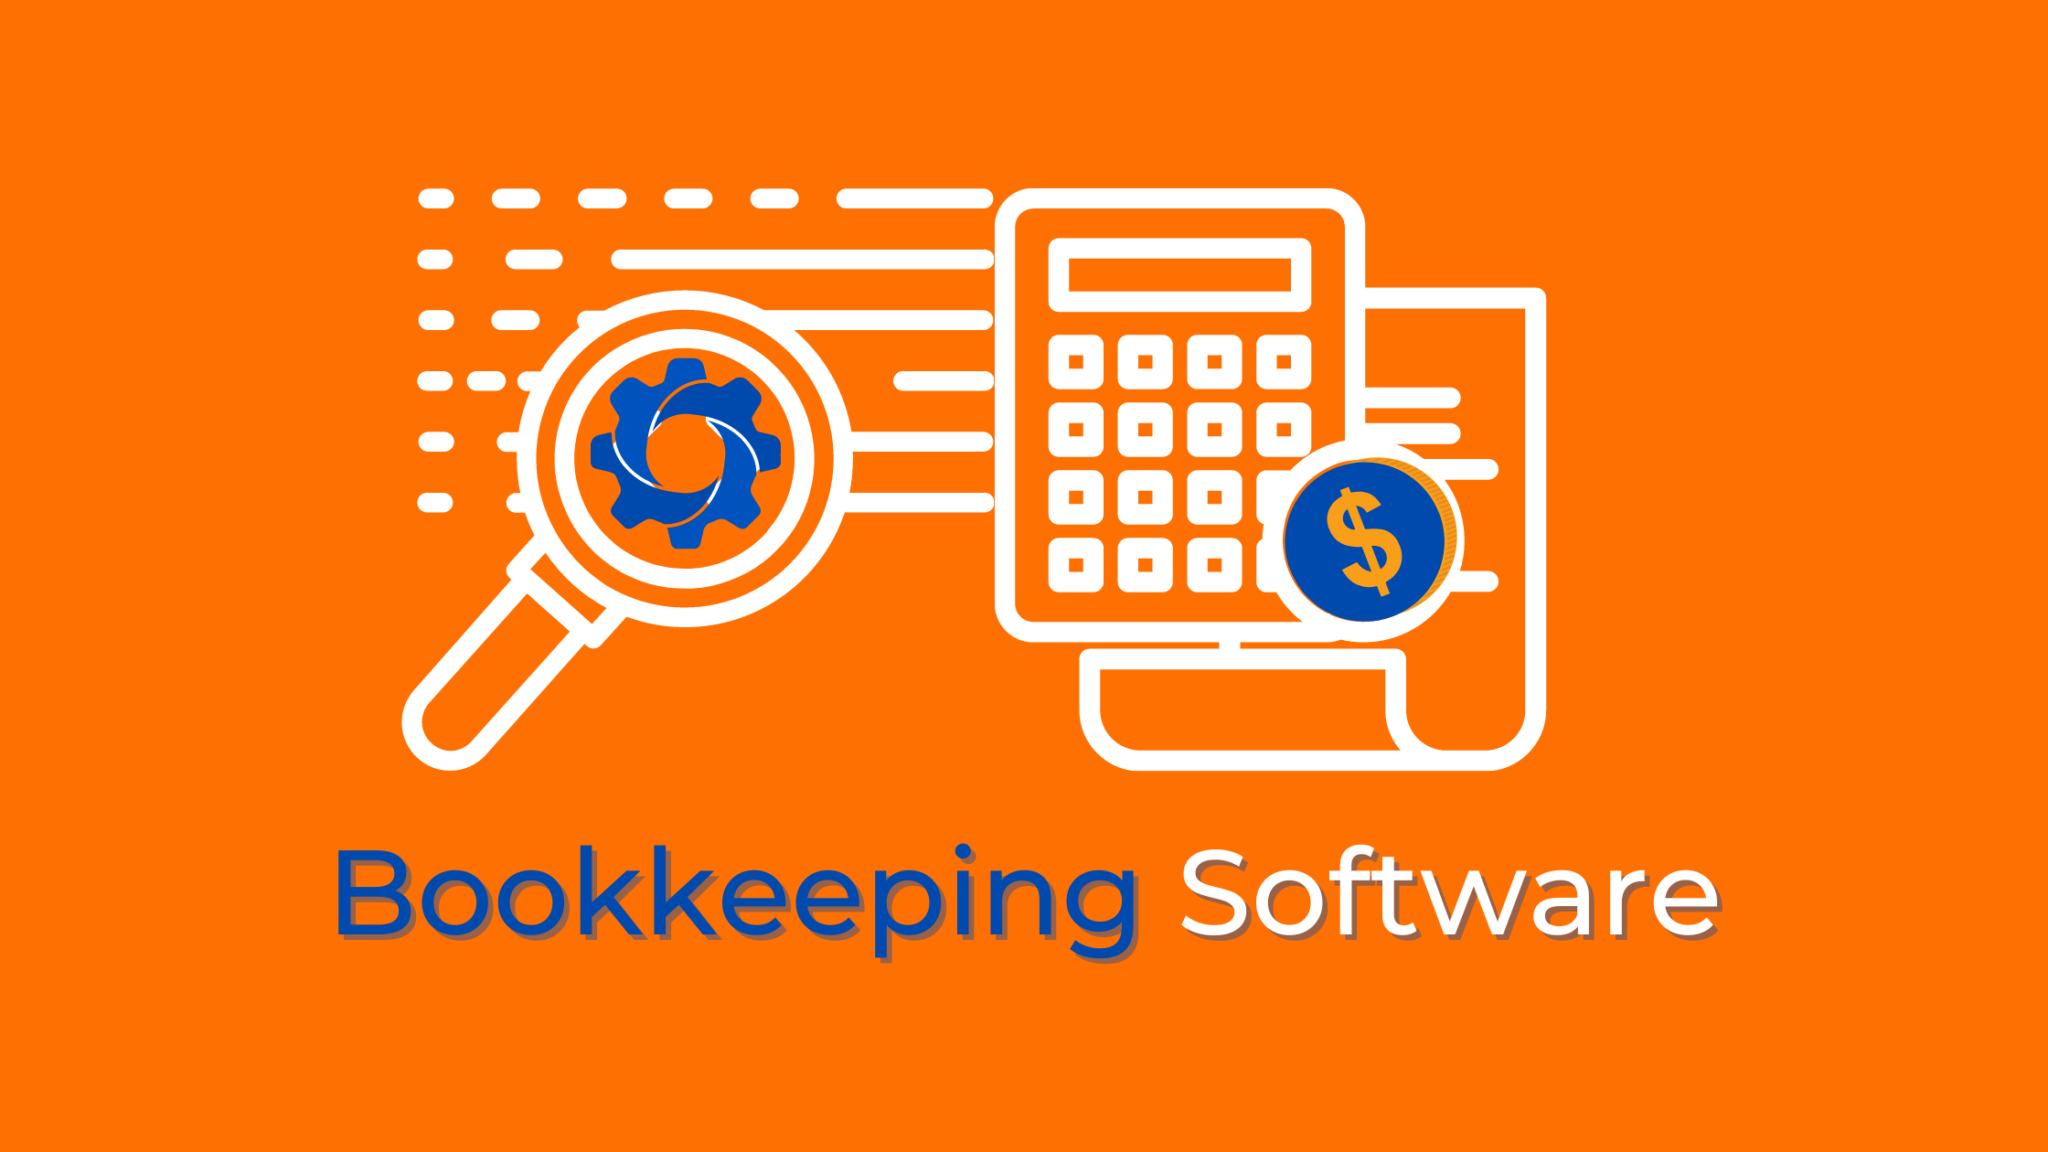 8 Best Bookkeeping Software for Small Businesses 2022